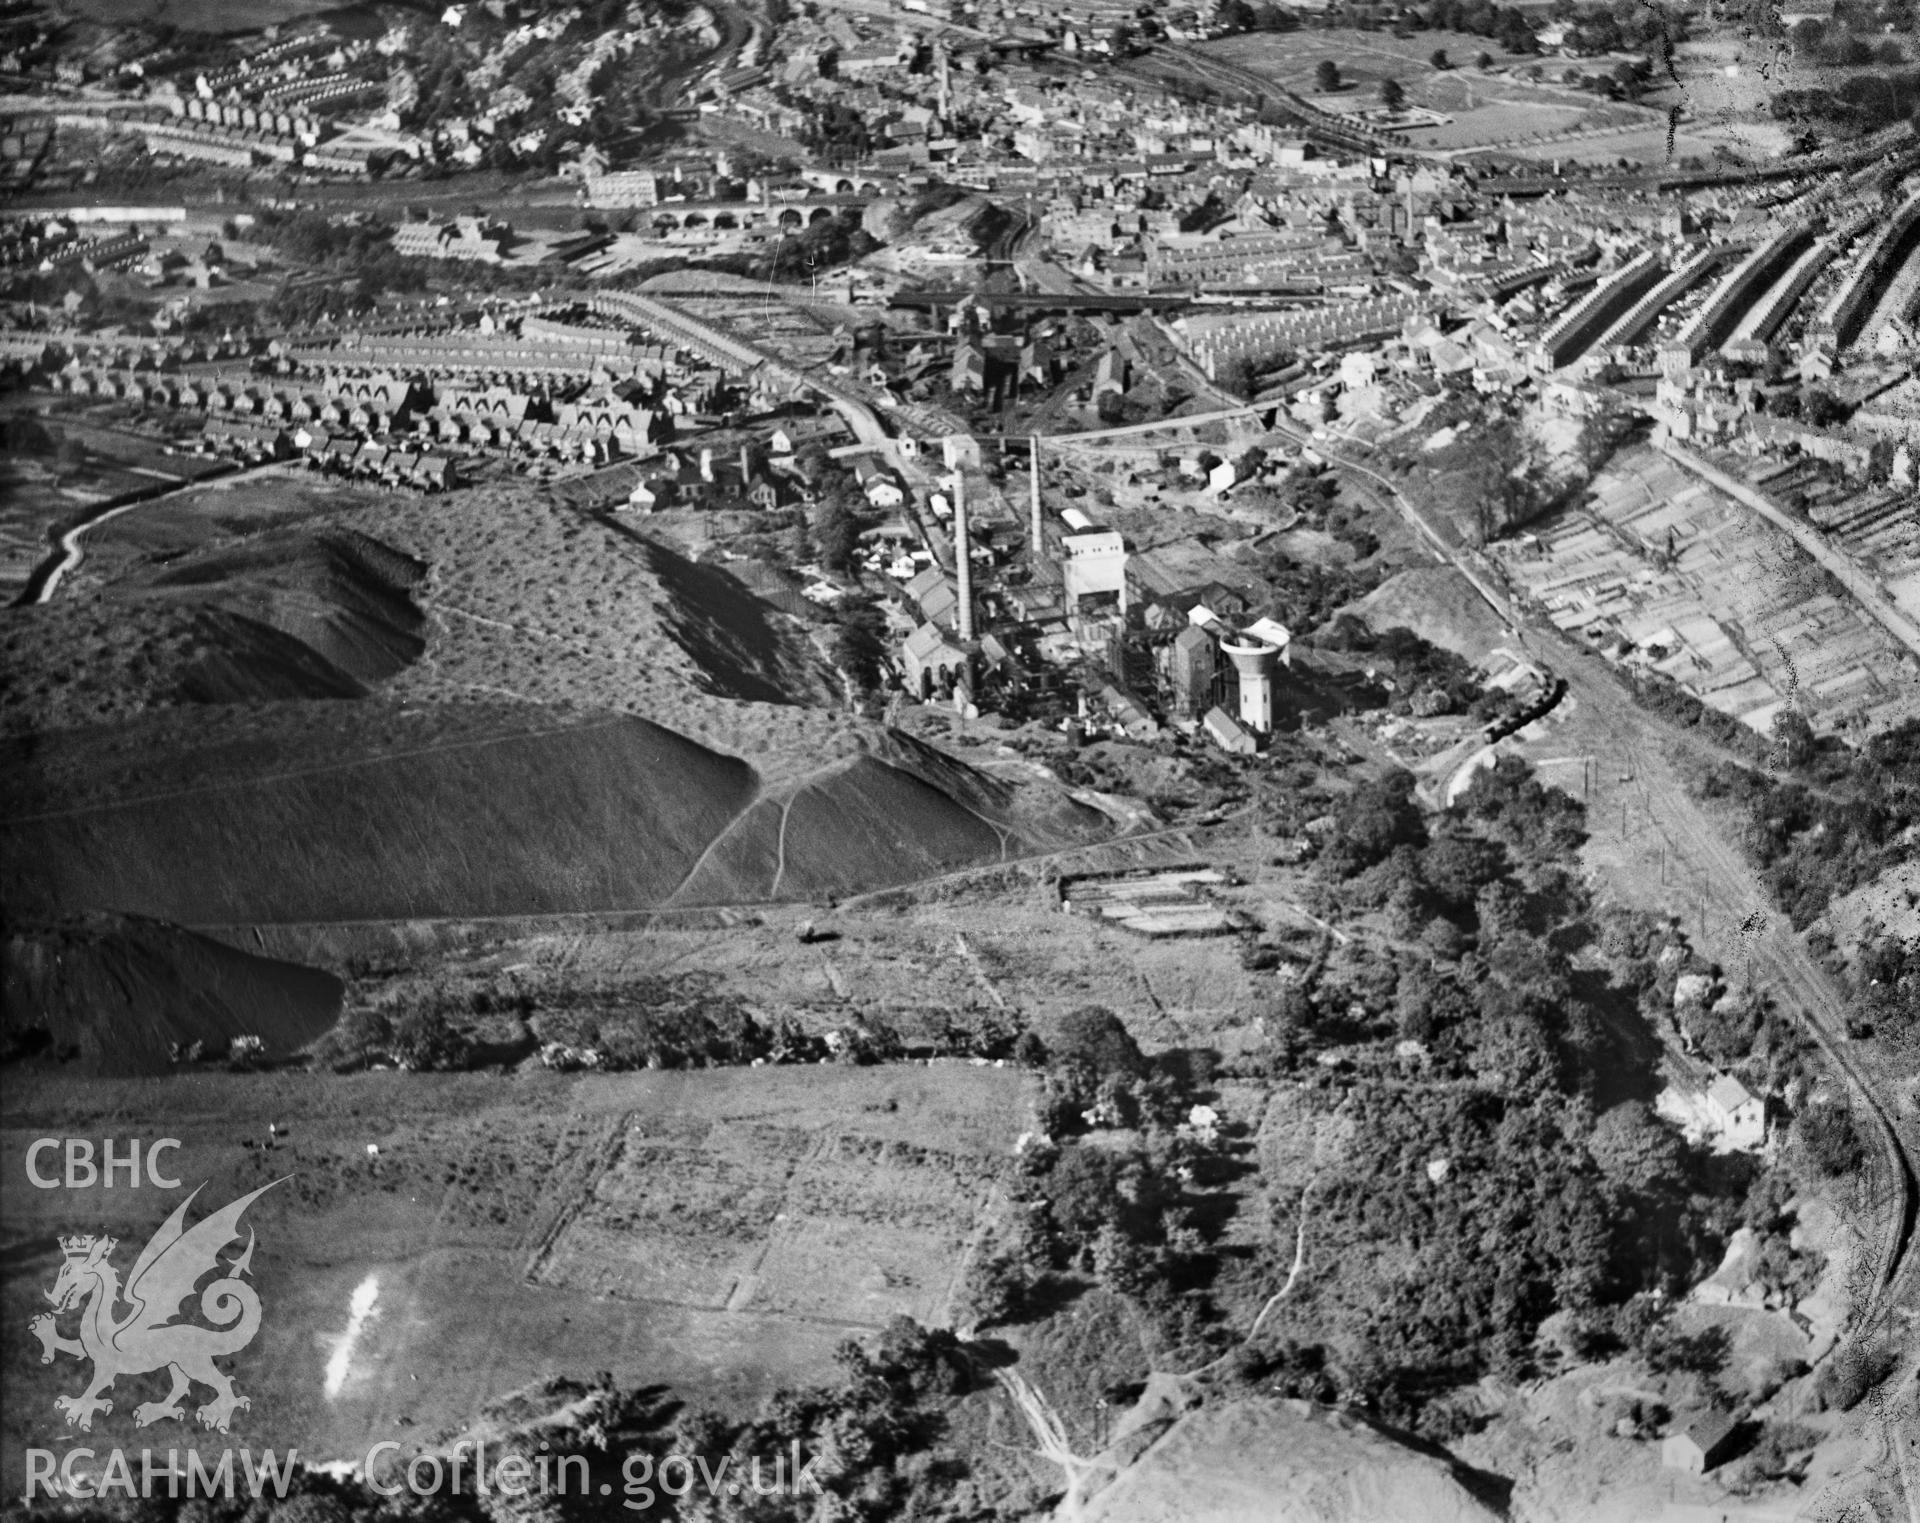 View of Maritime Colliery Coke Works, Pontypridd, looking from southwest, oblique aerial view. 5?x4? black and white glass plate negative.